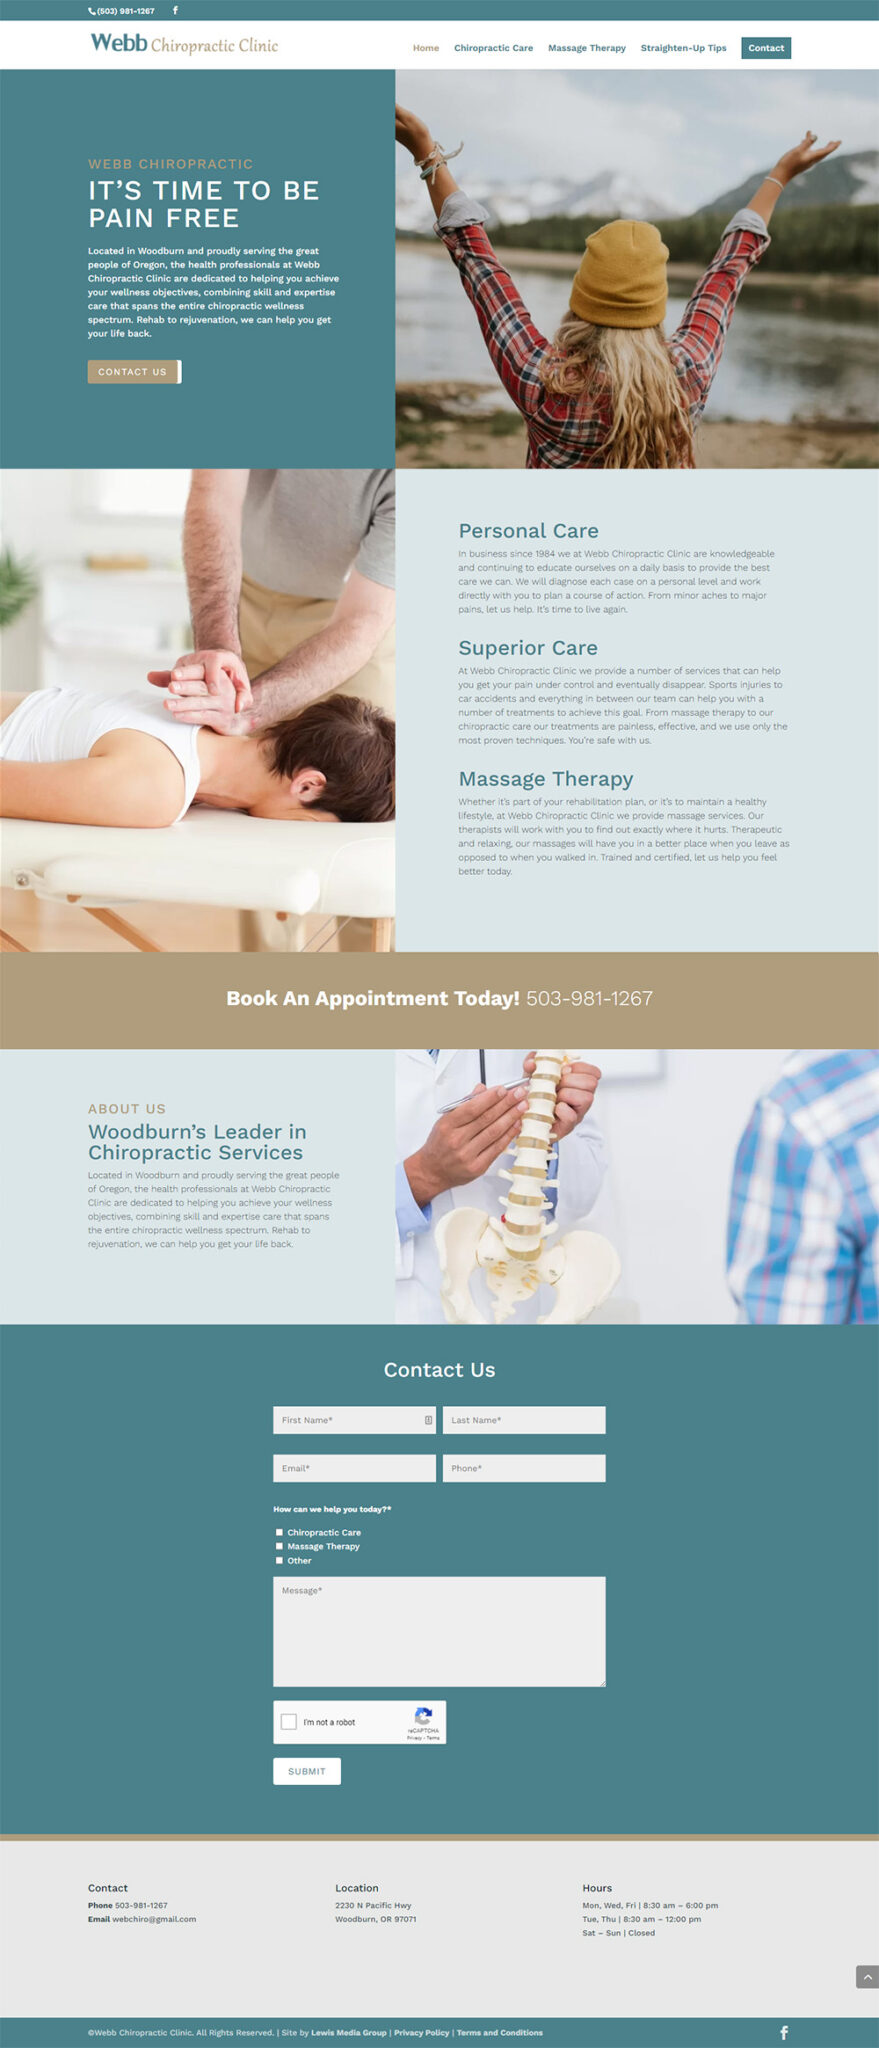 Webb Chiropractic Clinic Home page after redesign